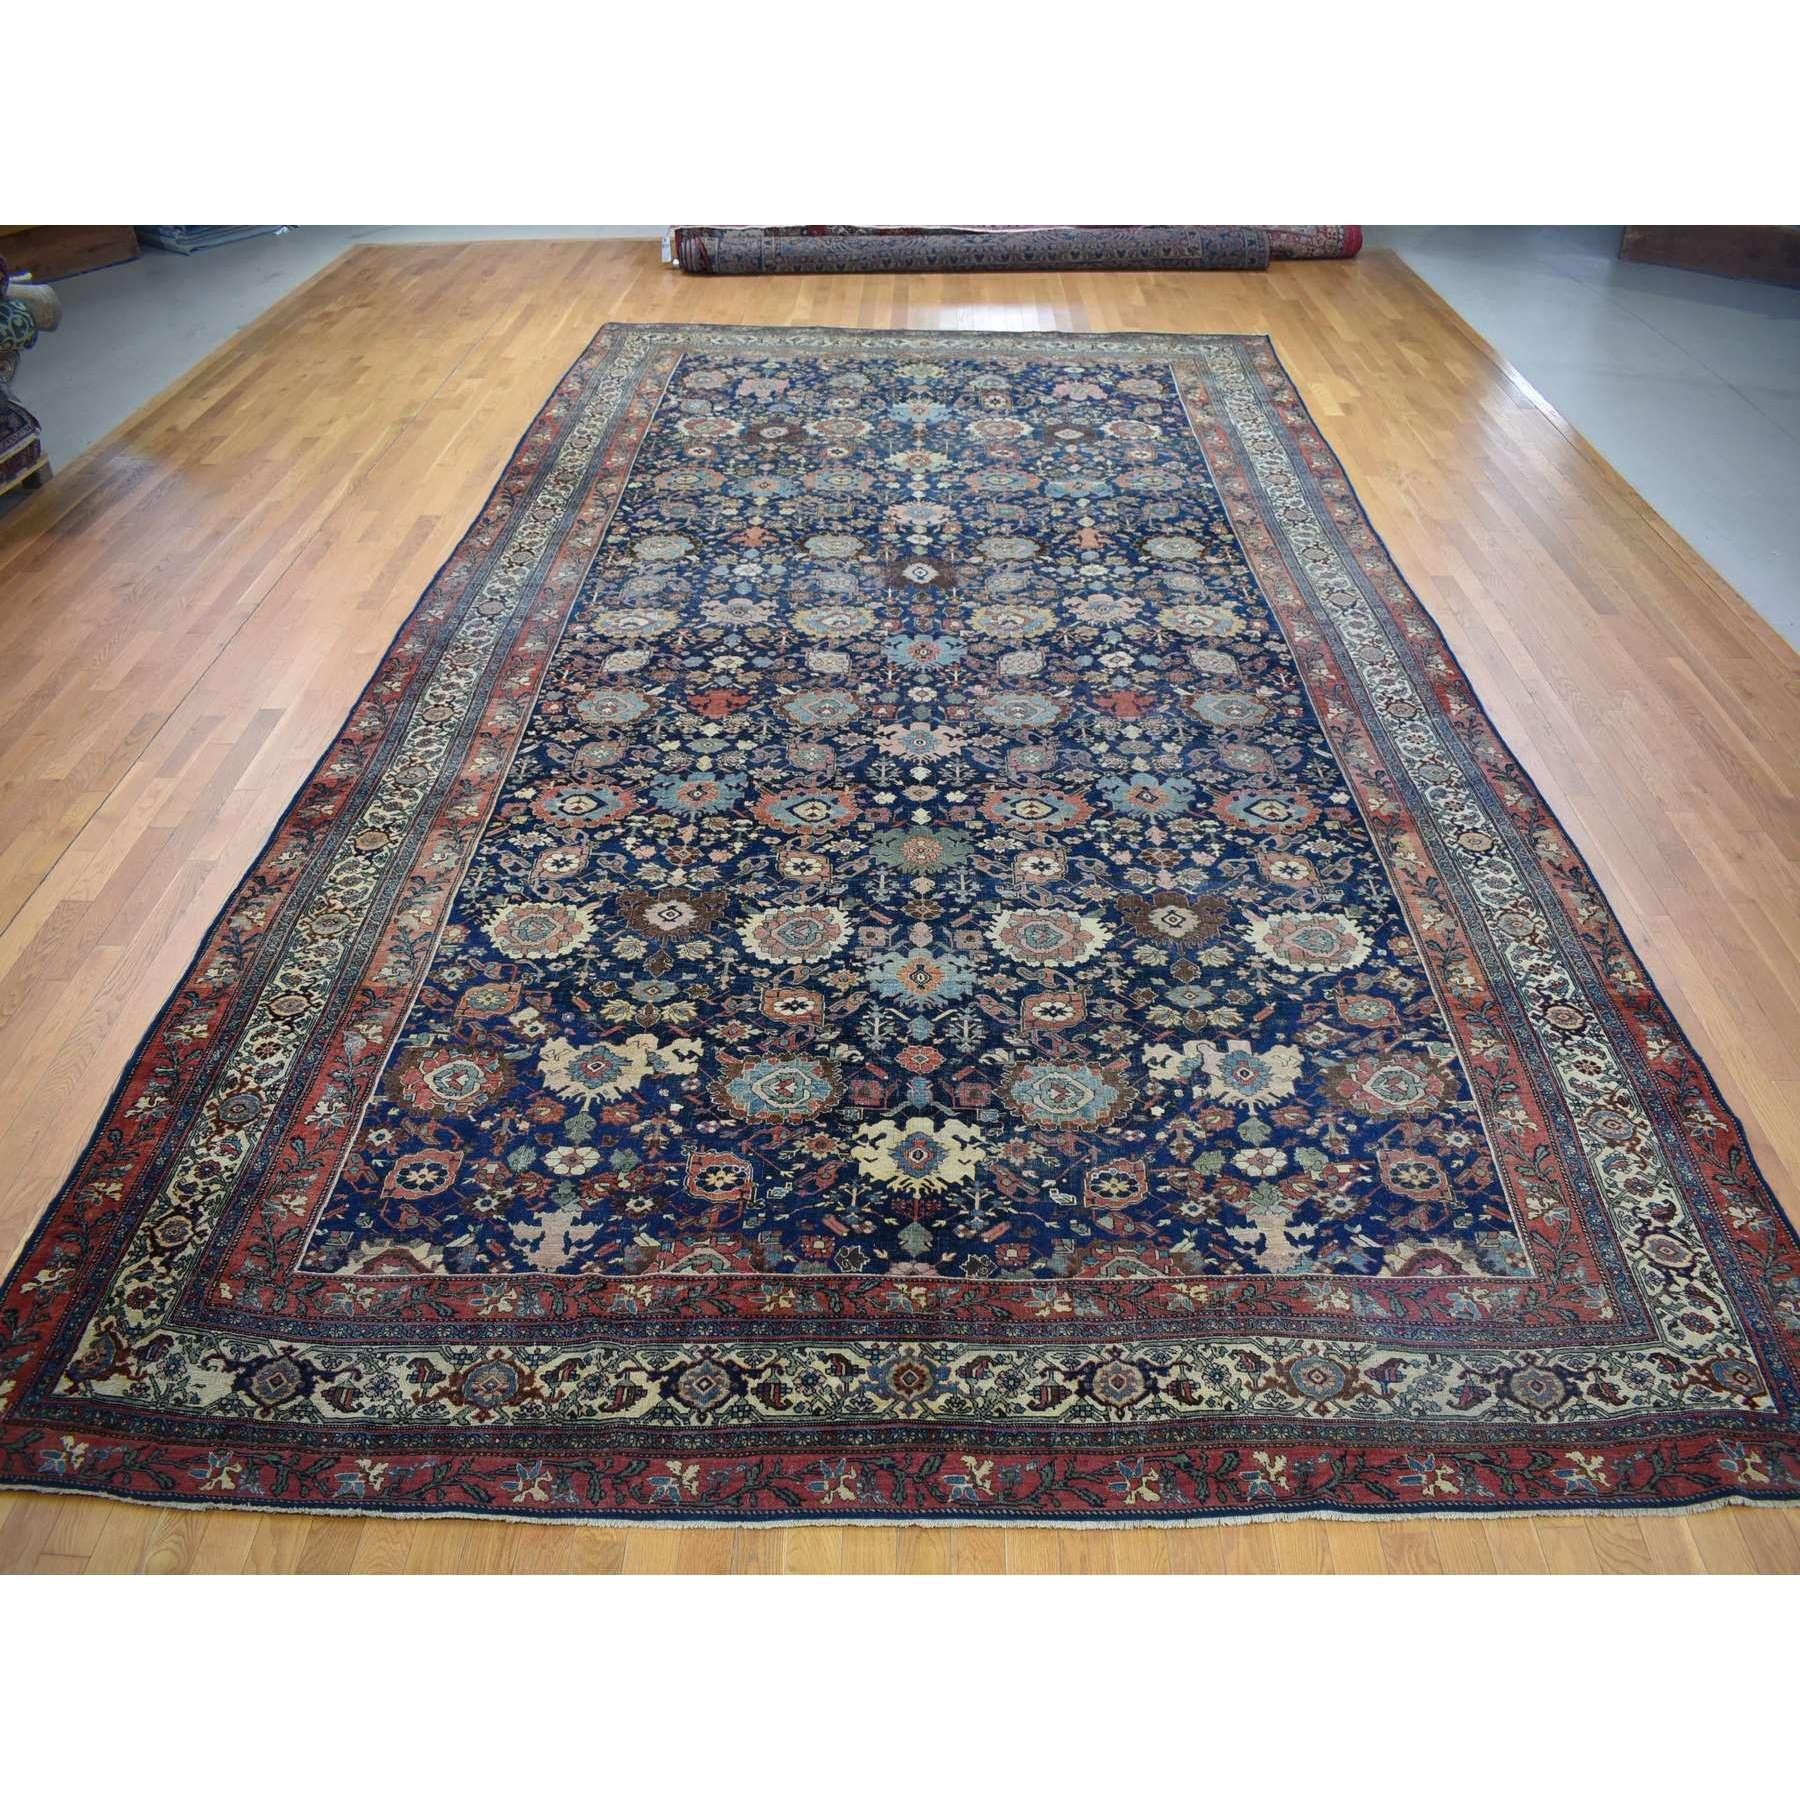 This fabulous hand-knotted carpet has been created and designed for extra strength and durability. This rug has been handcrafted for weeks in the traditional method that is used to make
Exact Rug Size in Feet and Inches : 11'0